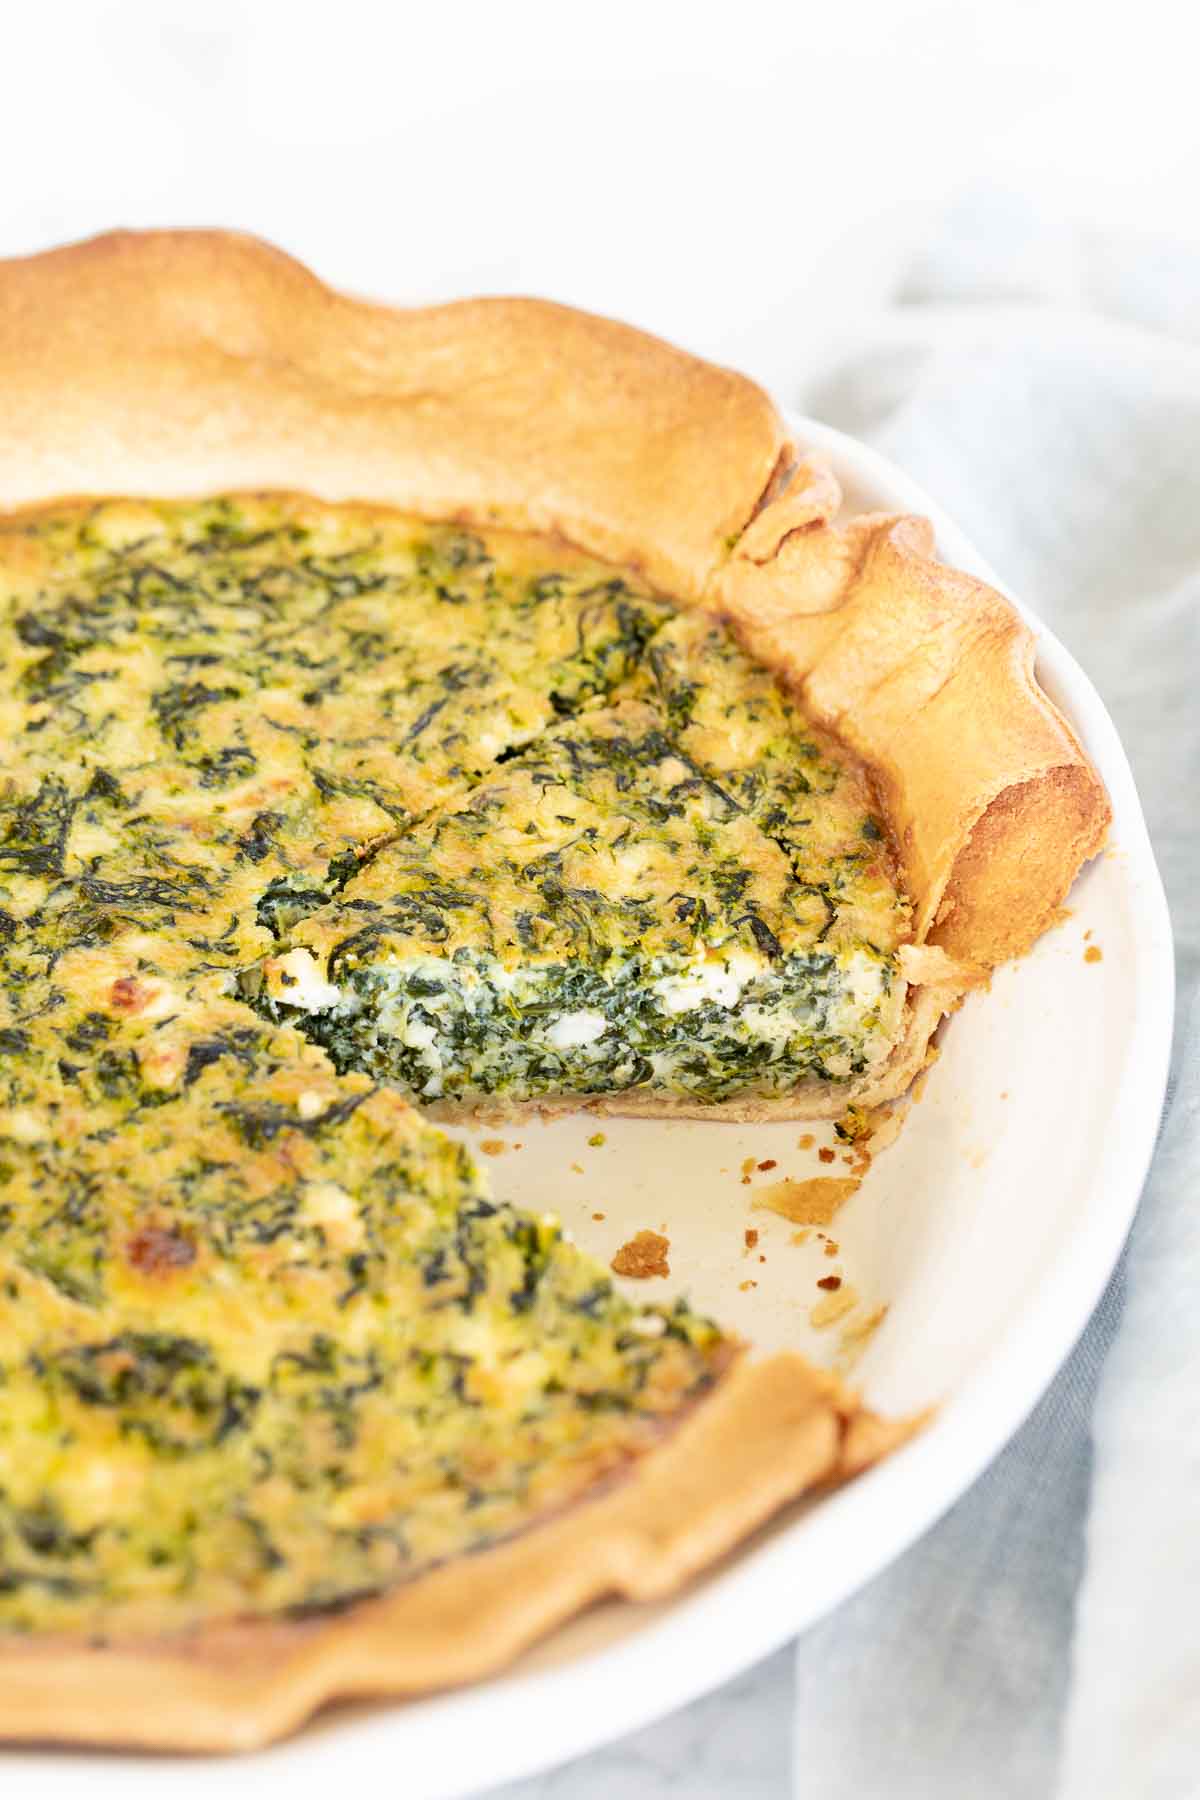 A freshly baked spinach and feta quiche with a slice removed, displayed on a white plate.